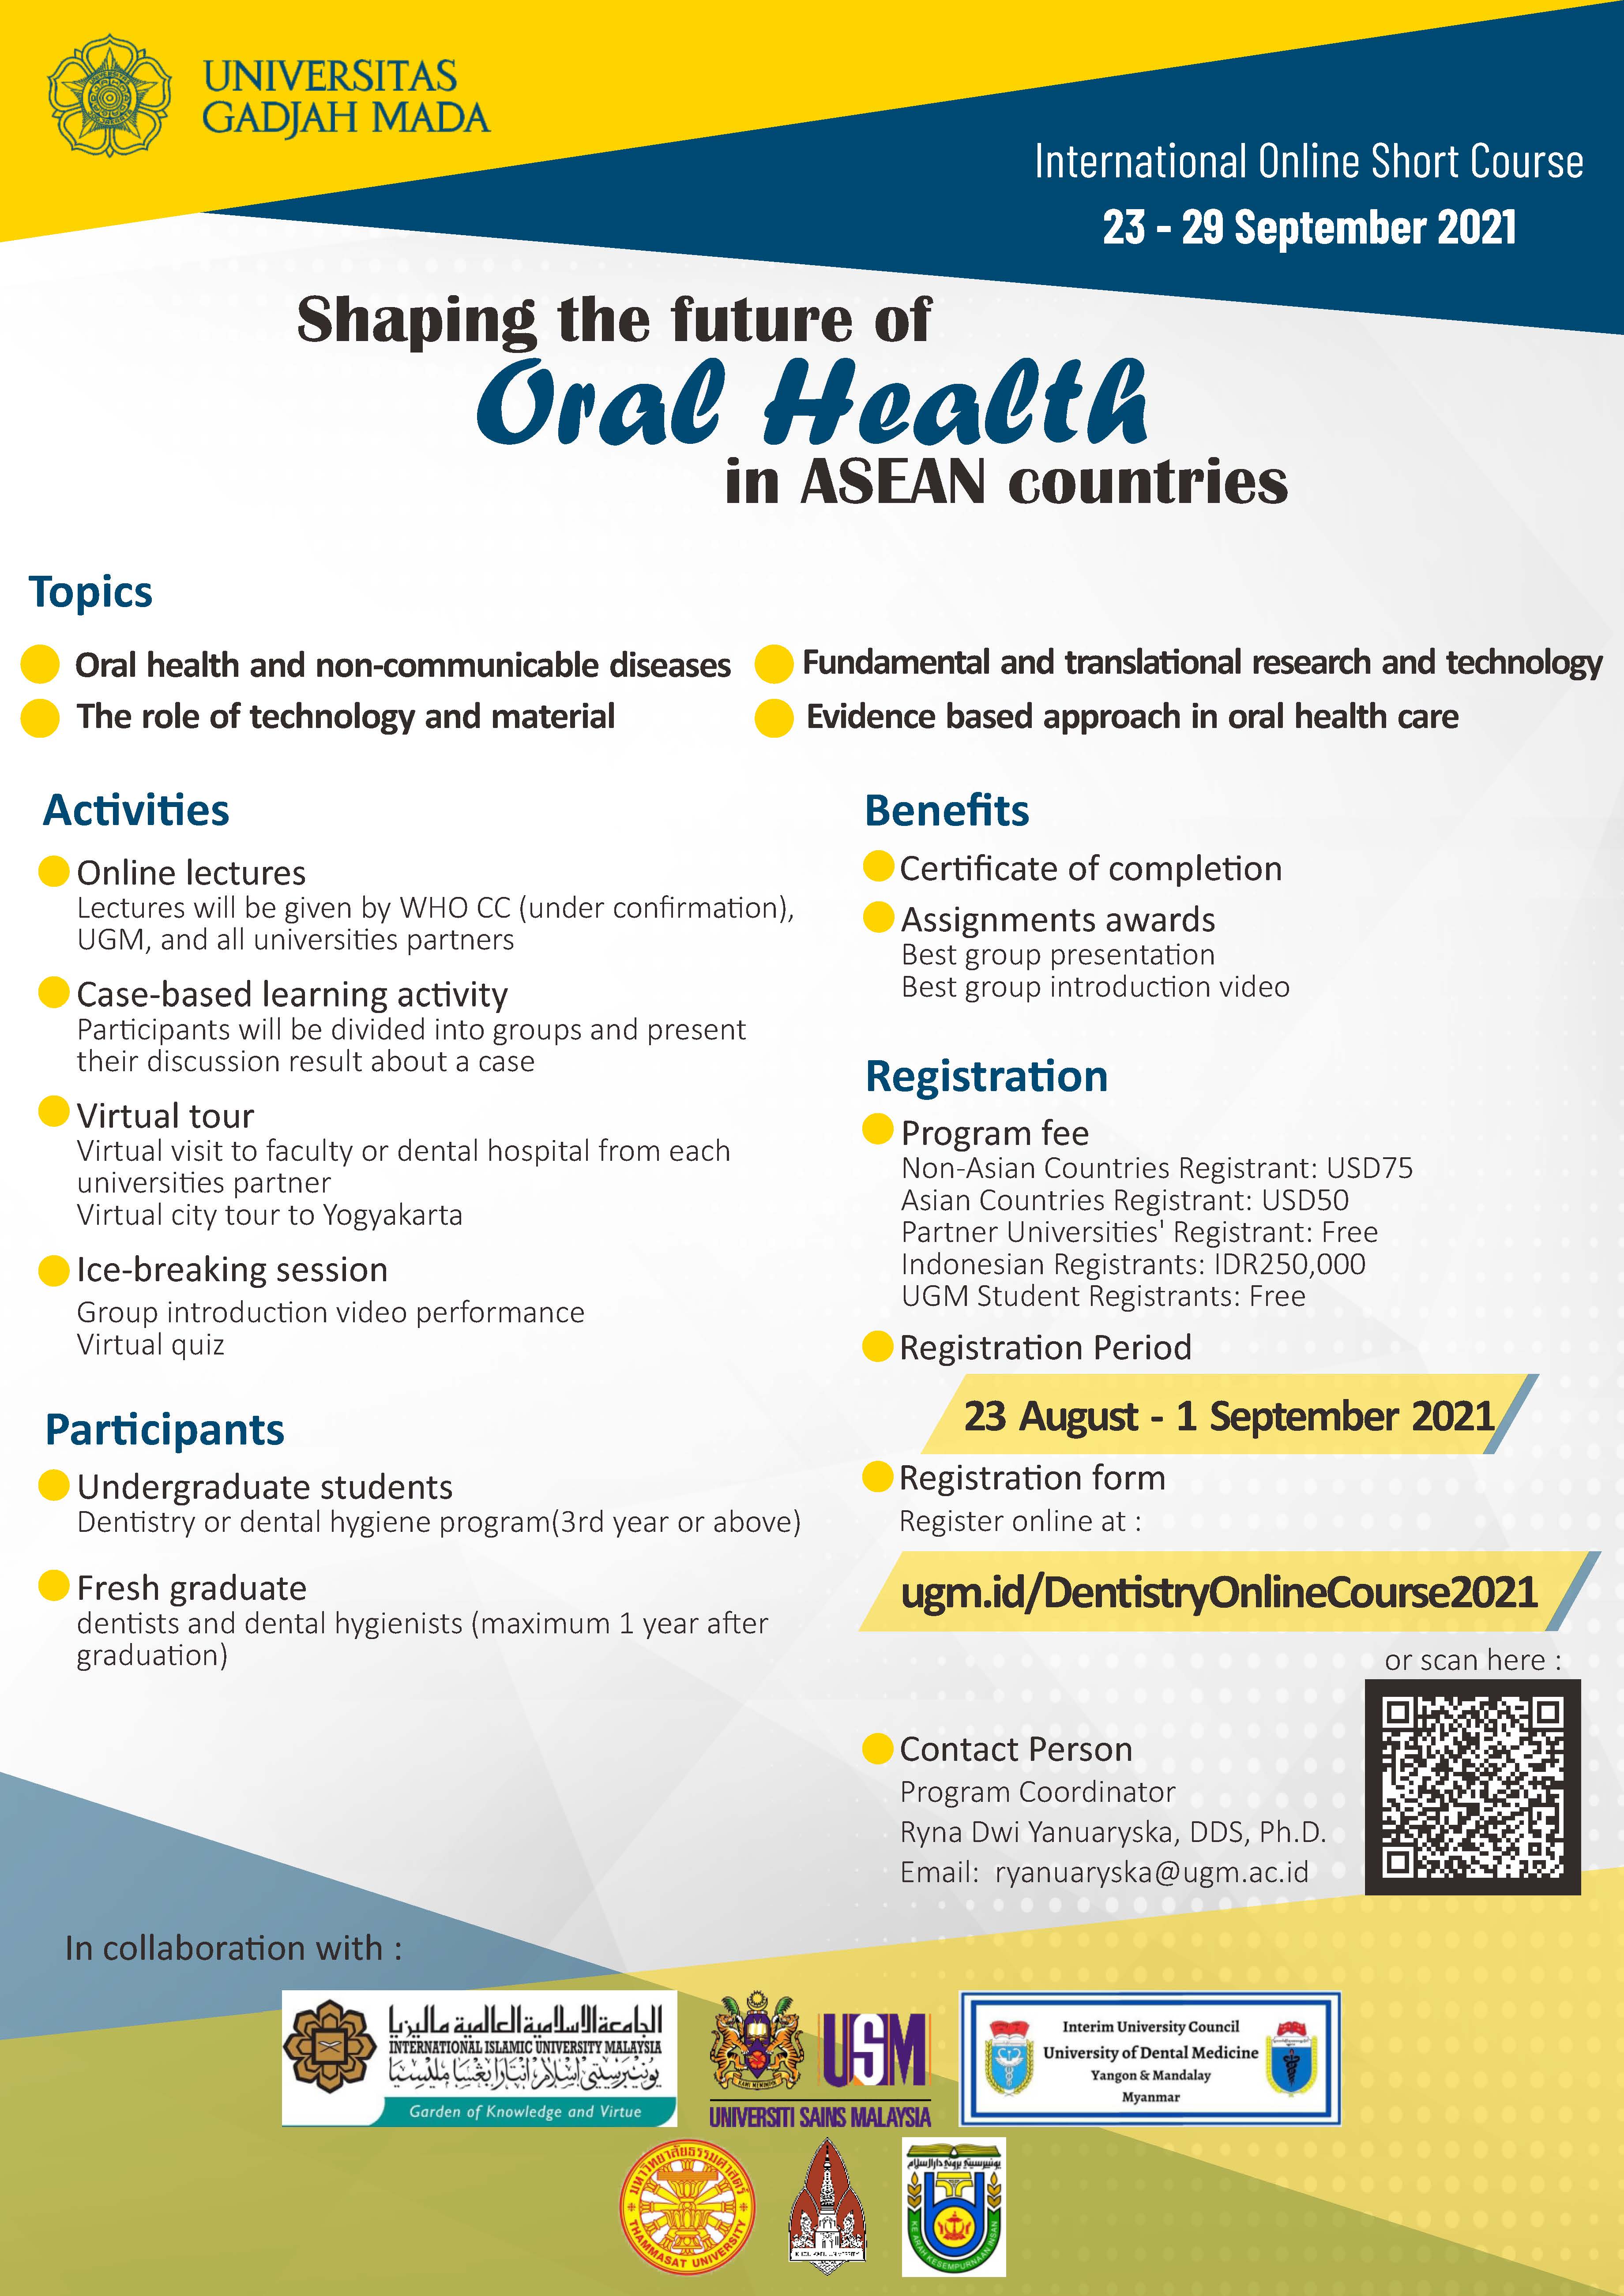 International Online Course: Shaping the Future of Oral Health in ASEAN Countries